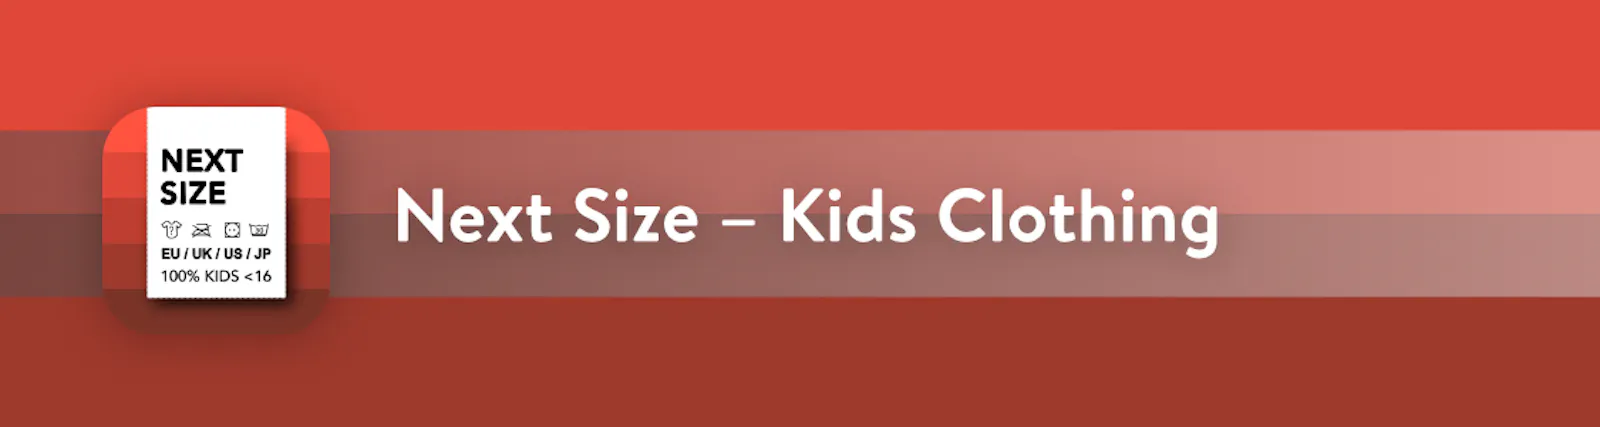 Next Size – Kids Clothing: App Icon showing a washing label on red background.